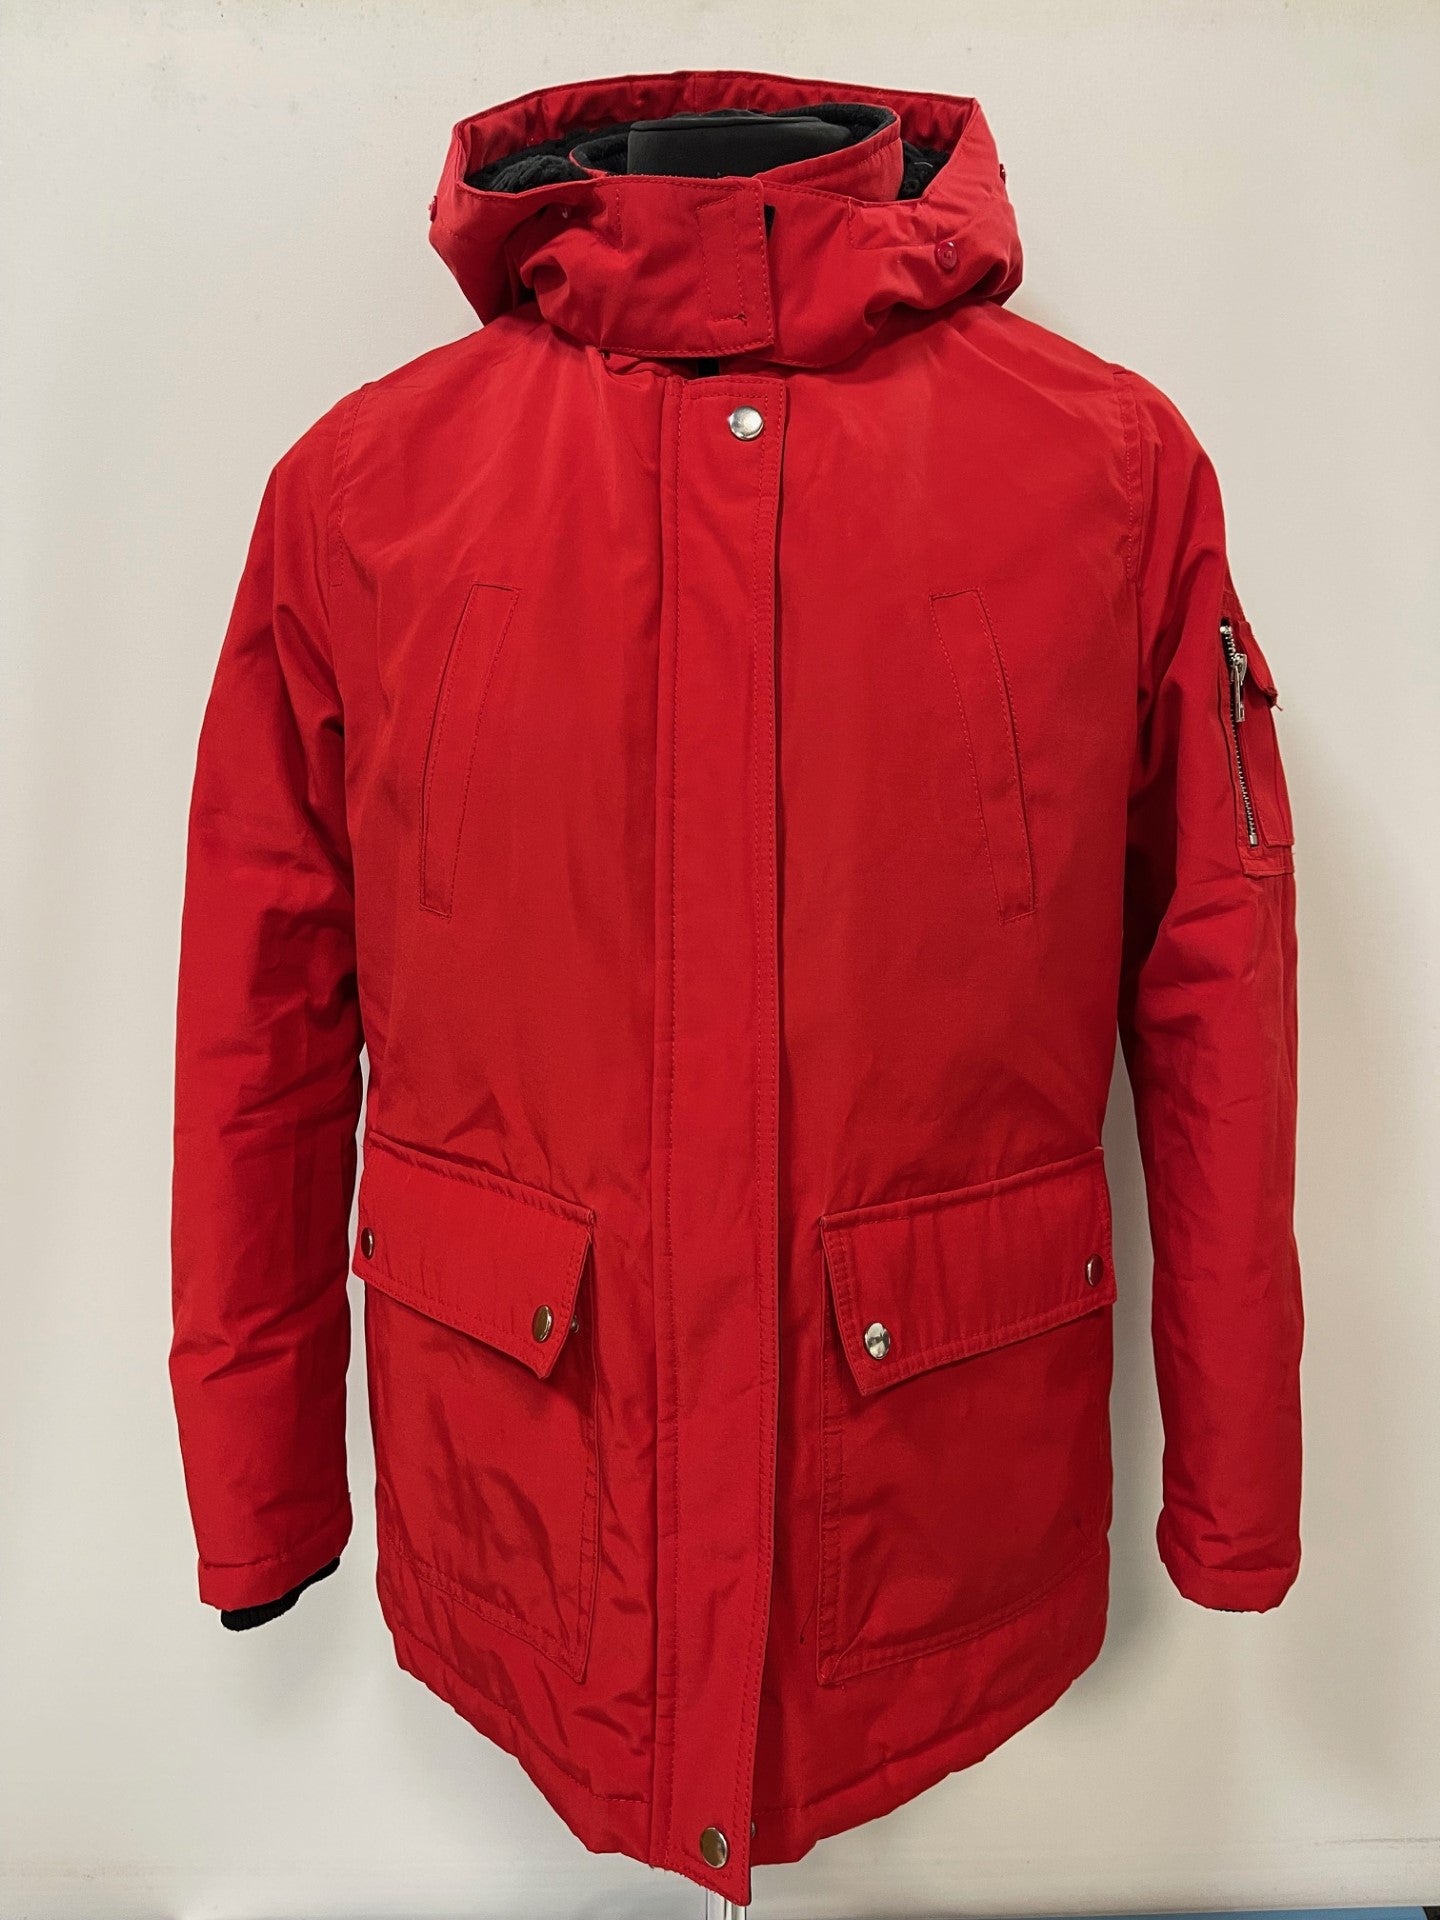 New Look Red Jacket Size 12